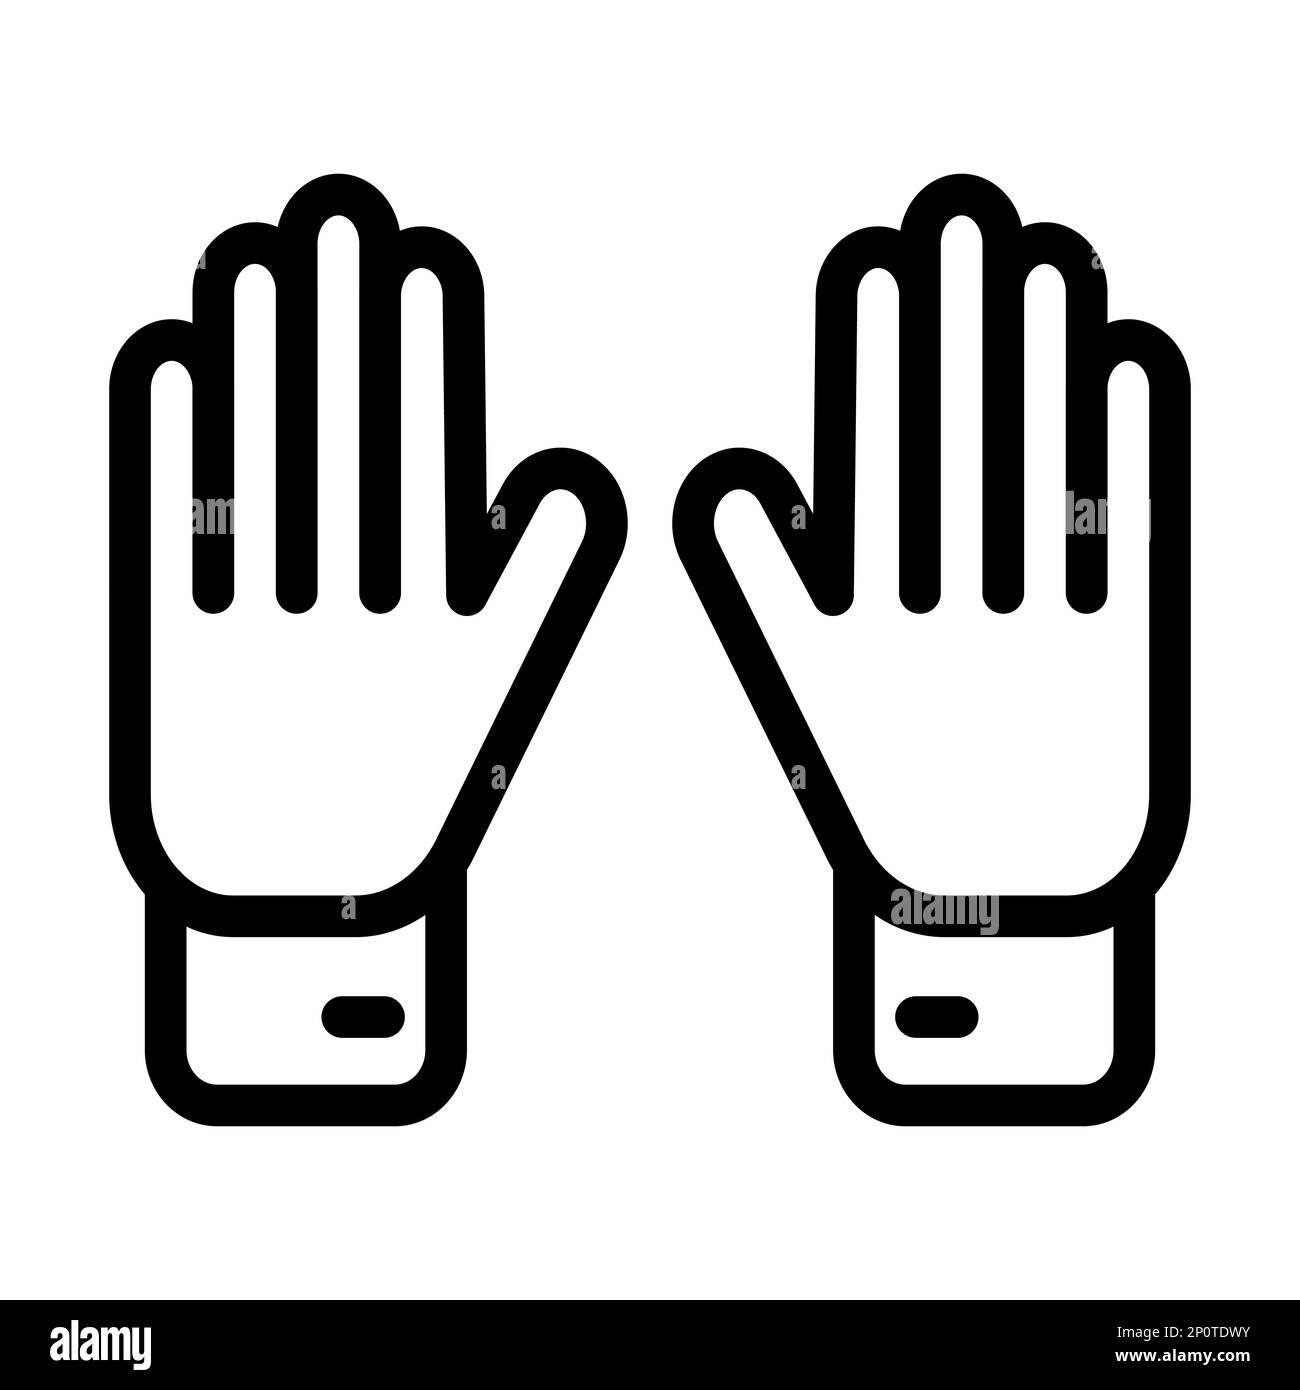 Goalie Gloves Vector Thick Line Icon For Personal And Commercial Use. Stock Photo